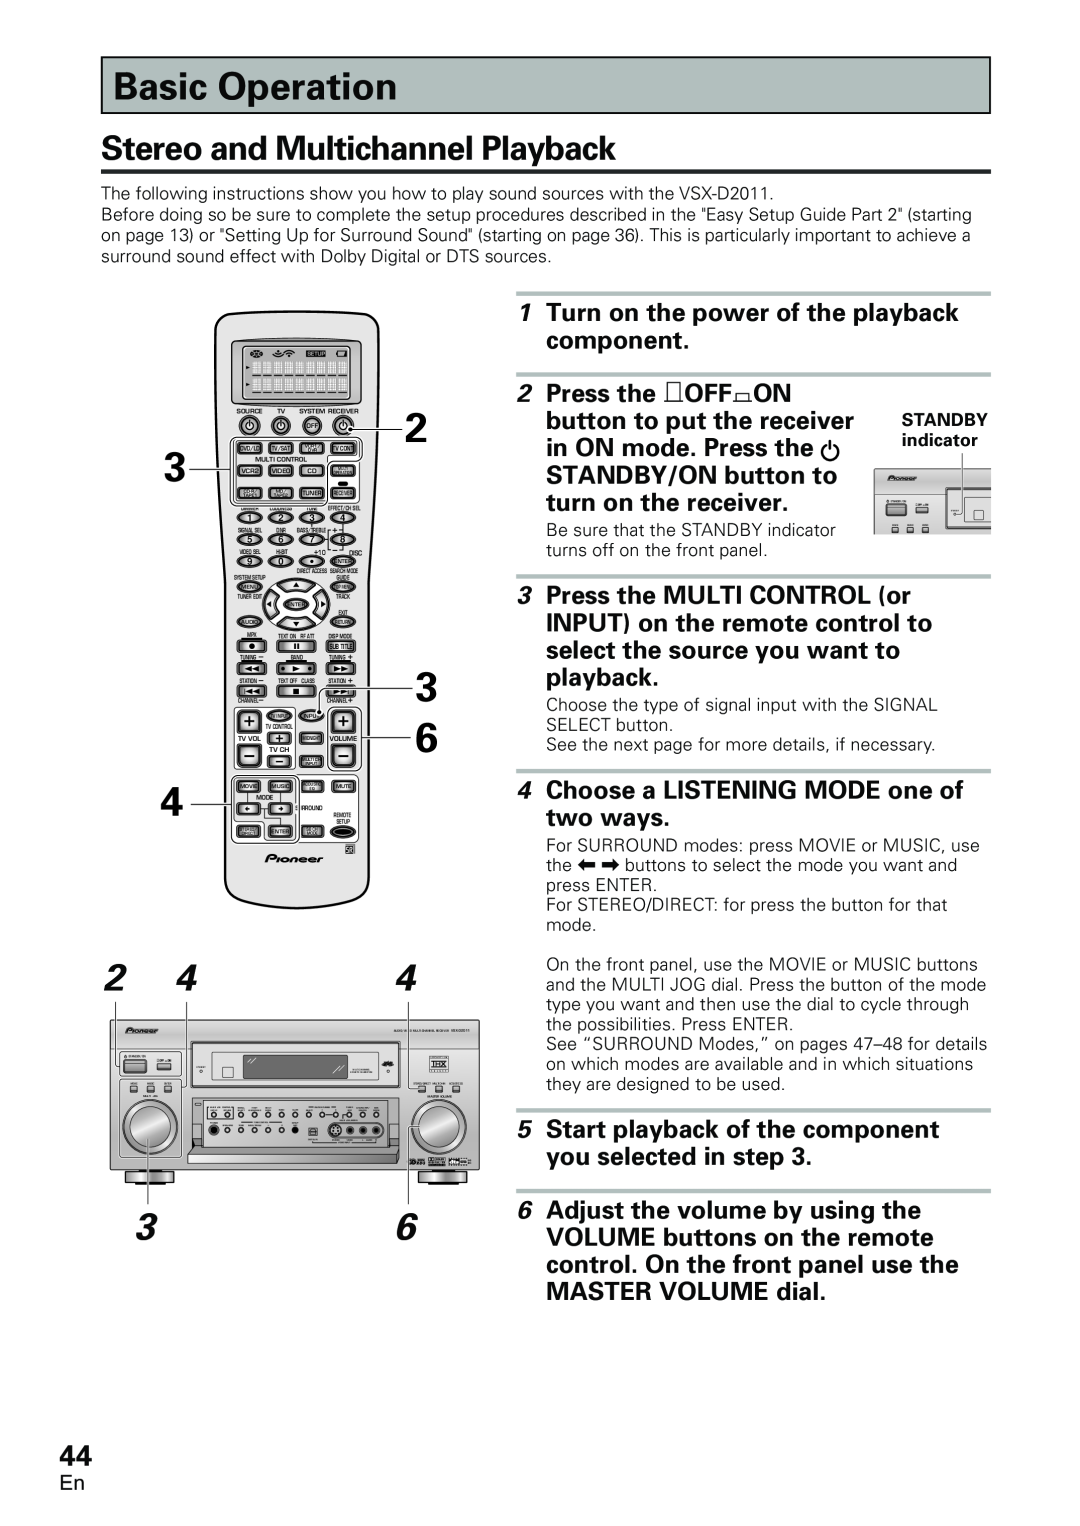 Pioneer VSX-D2011-G manual Basic Operation, Stereo and Multichannel Playback, 1Turn on the power of the playback component 